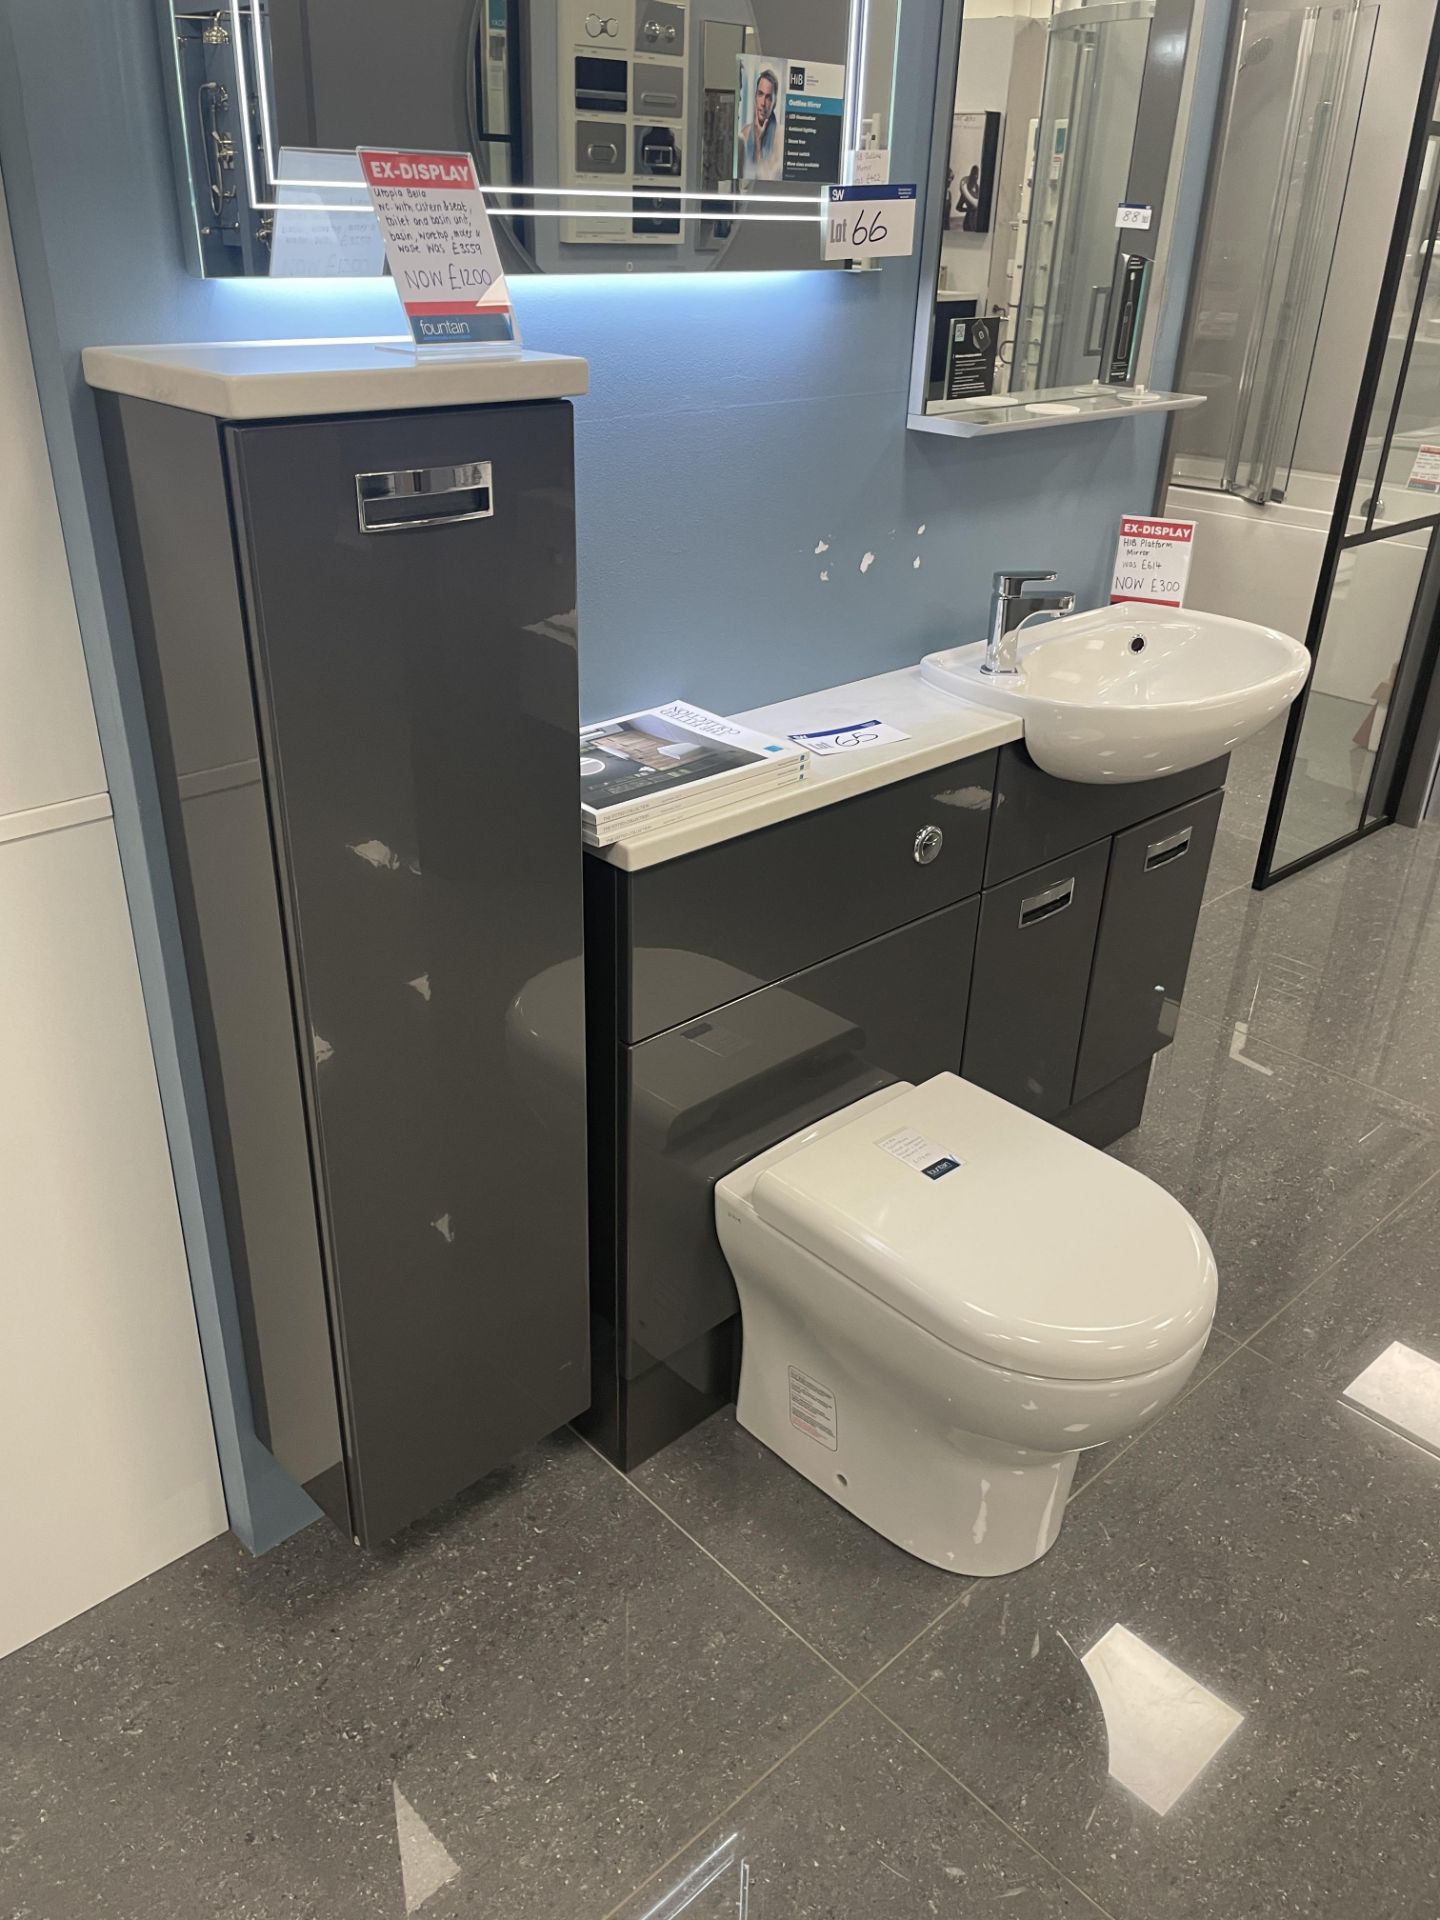 Utopia Bella Toilet & Basin Unit, with fitted cabinets, worktop and tap, overall size approx. 1.6m x